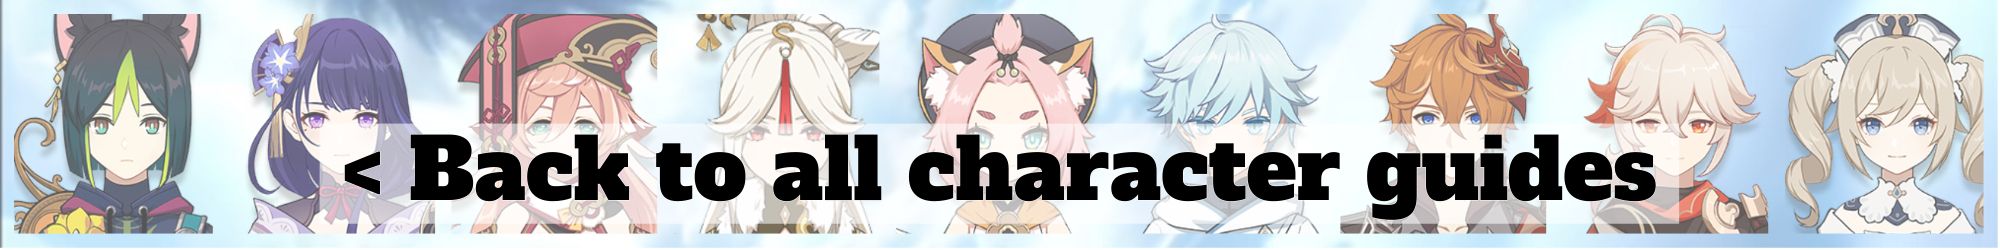 character guide link